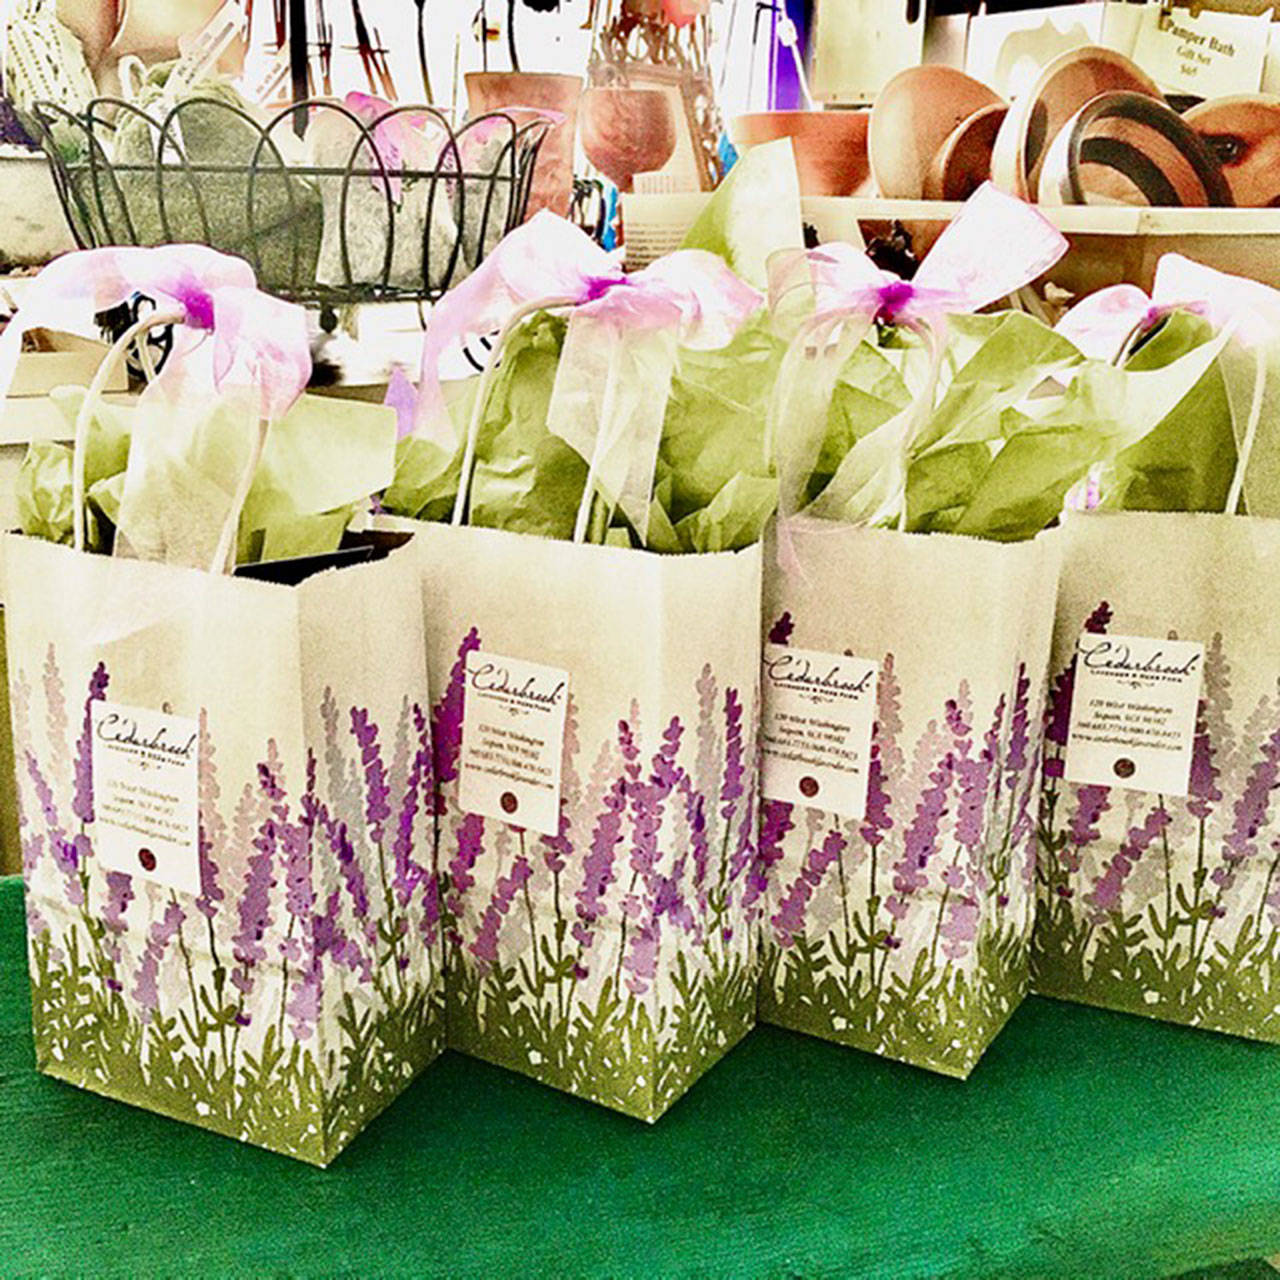 For every $20 gift basket purchased for local healthcare workers, owners of Cedarbrook Lavender Farm will add up to $10 in extra products and deliver the bags. Photo courtesy of Cedarbrook Lavender Farm